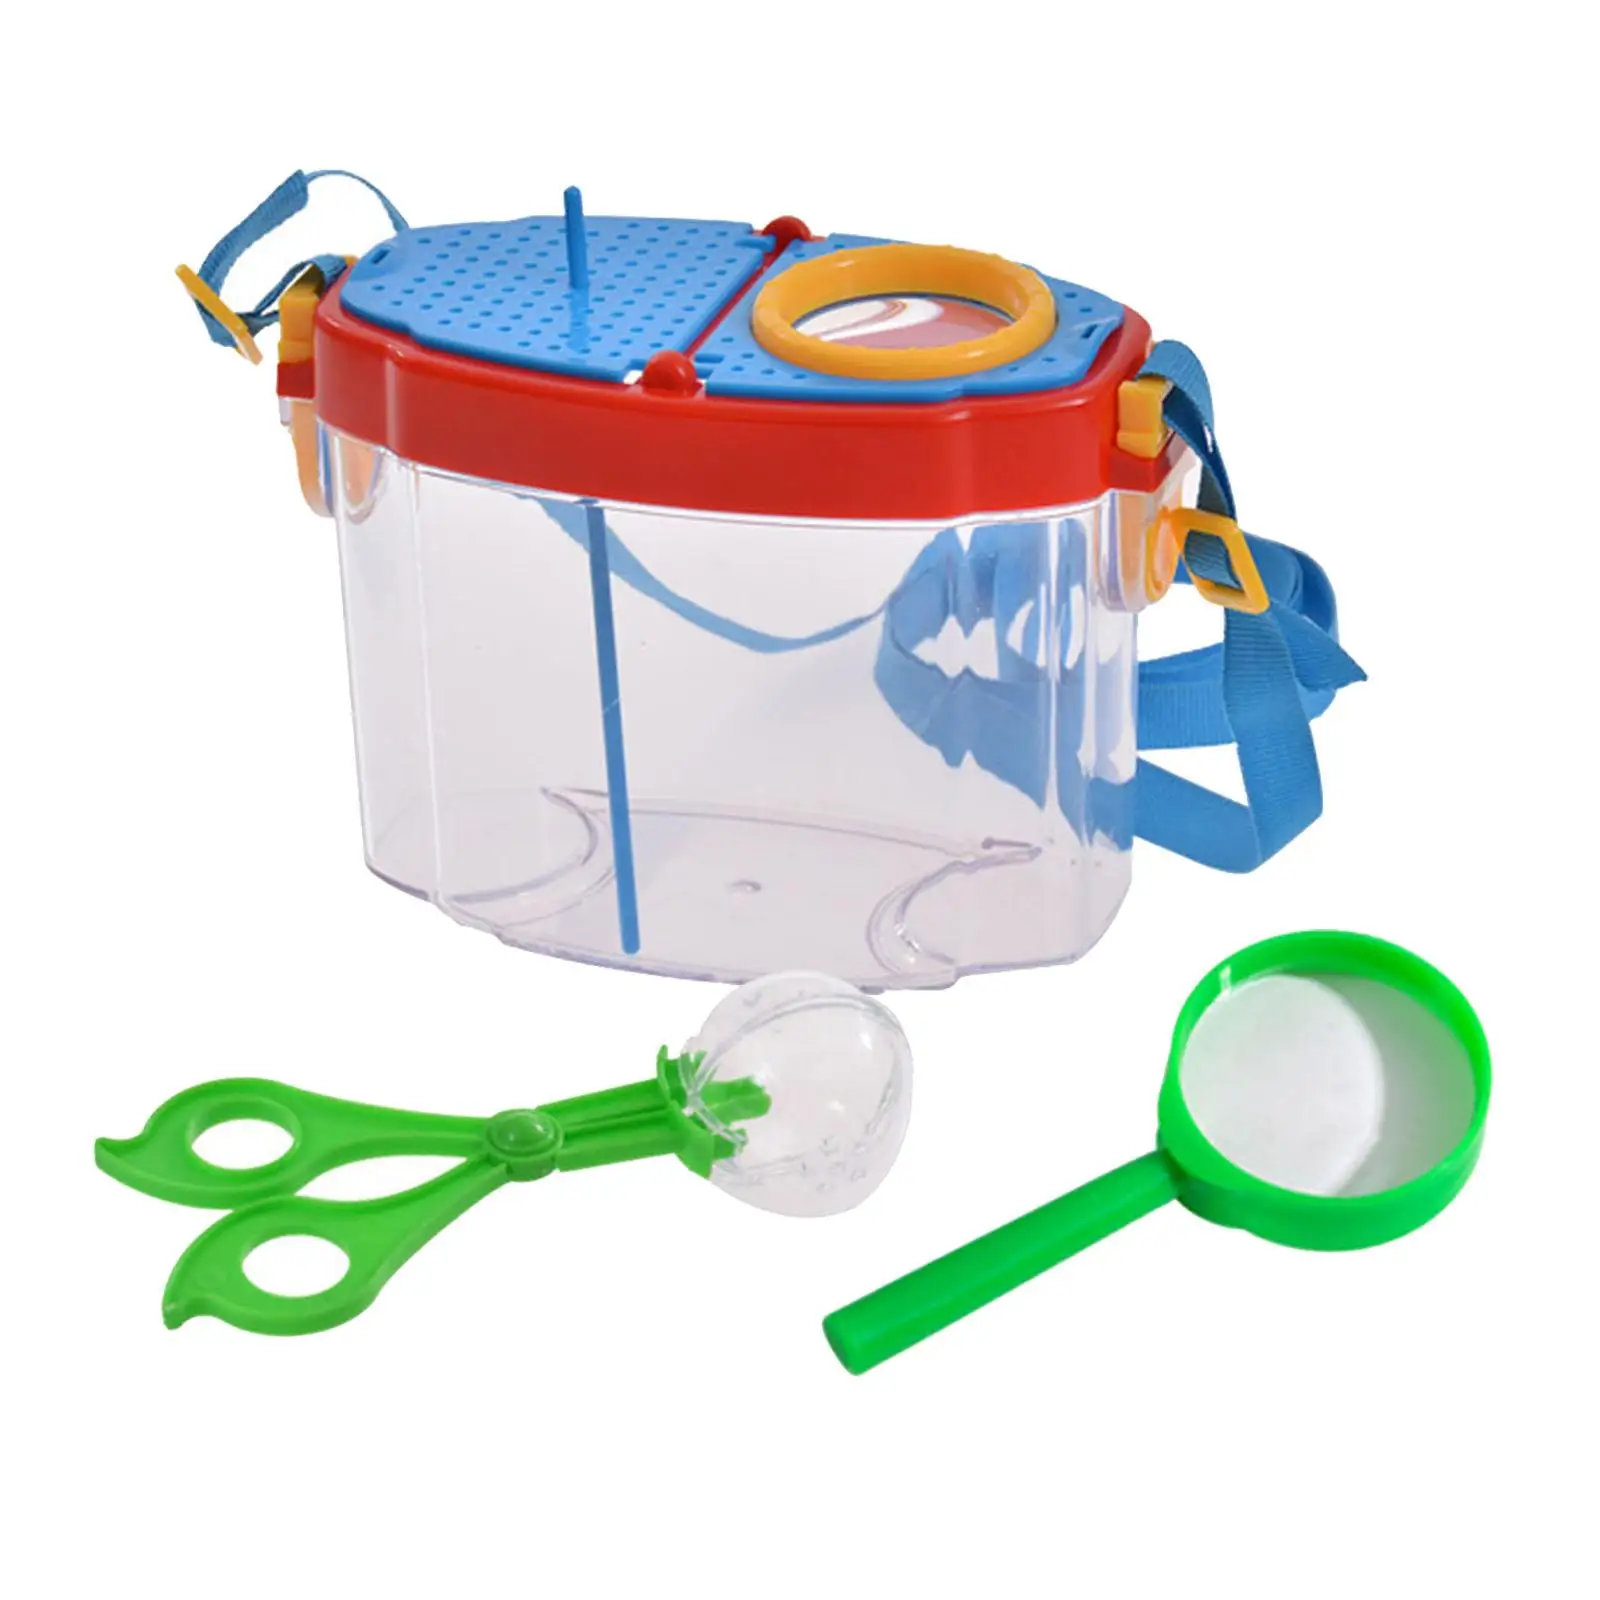 Insert  Viewer   Catcher    Magnifying Jar Collecting Kit  Container Case  Exploration